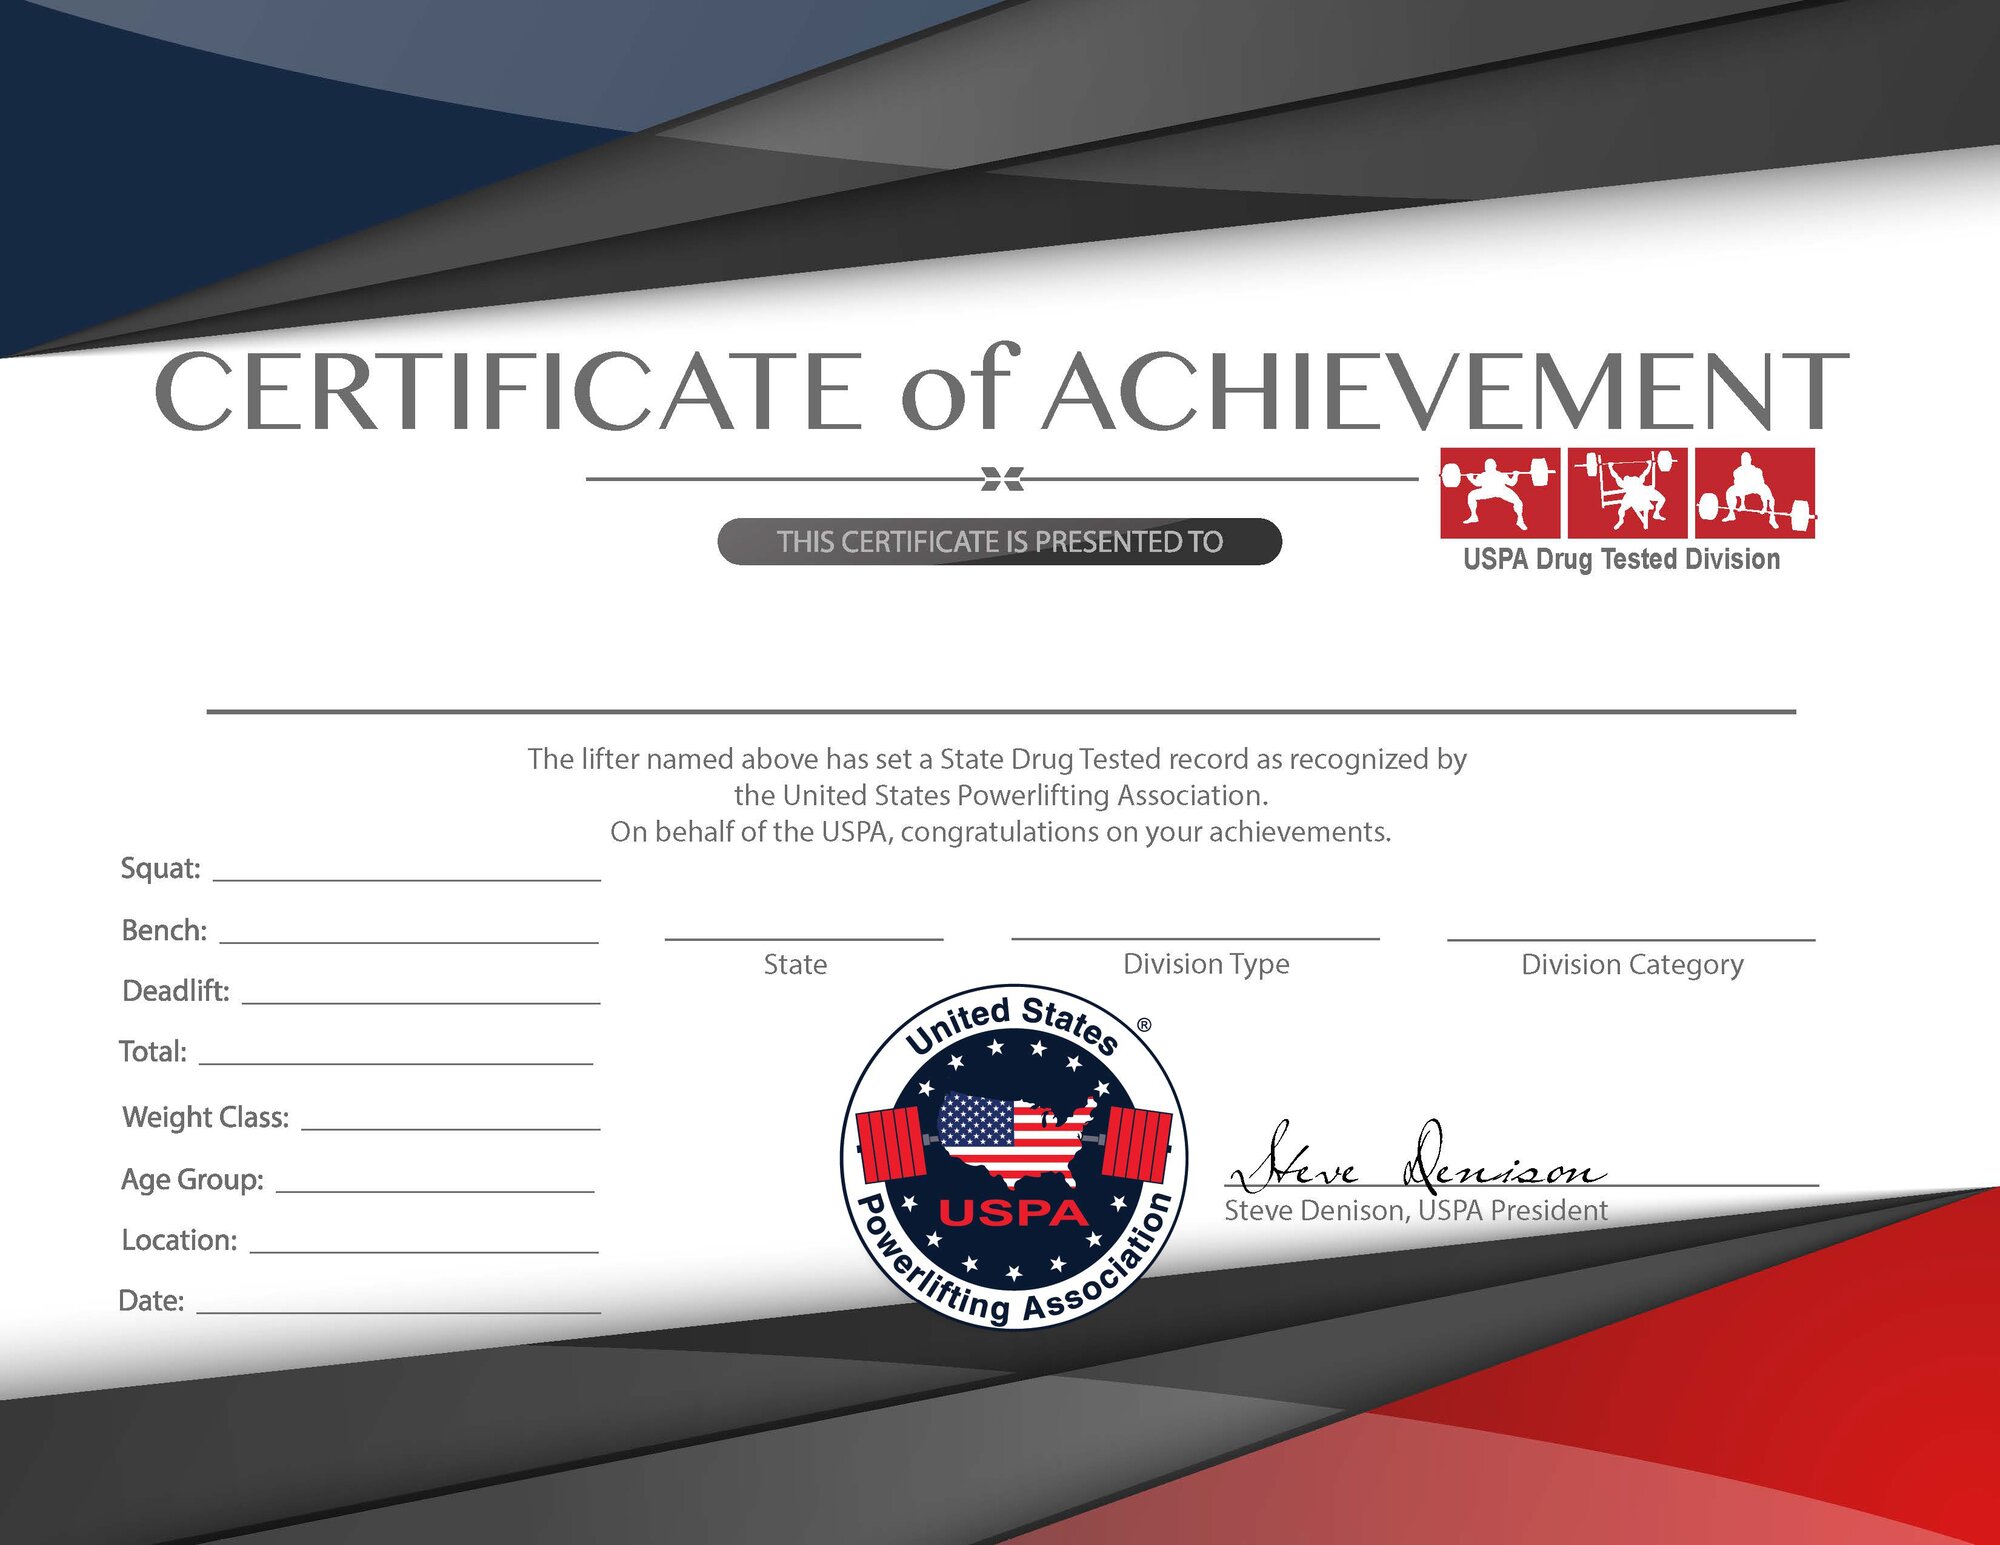 Certificate Background Image